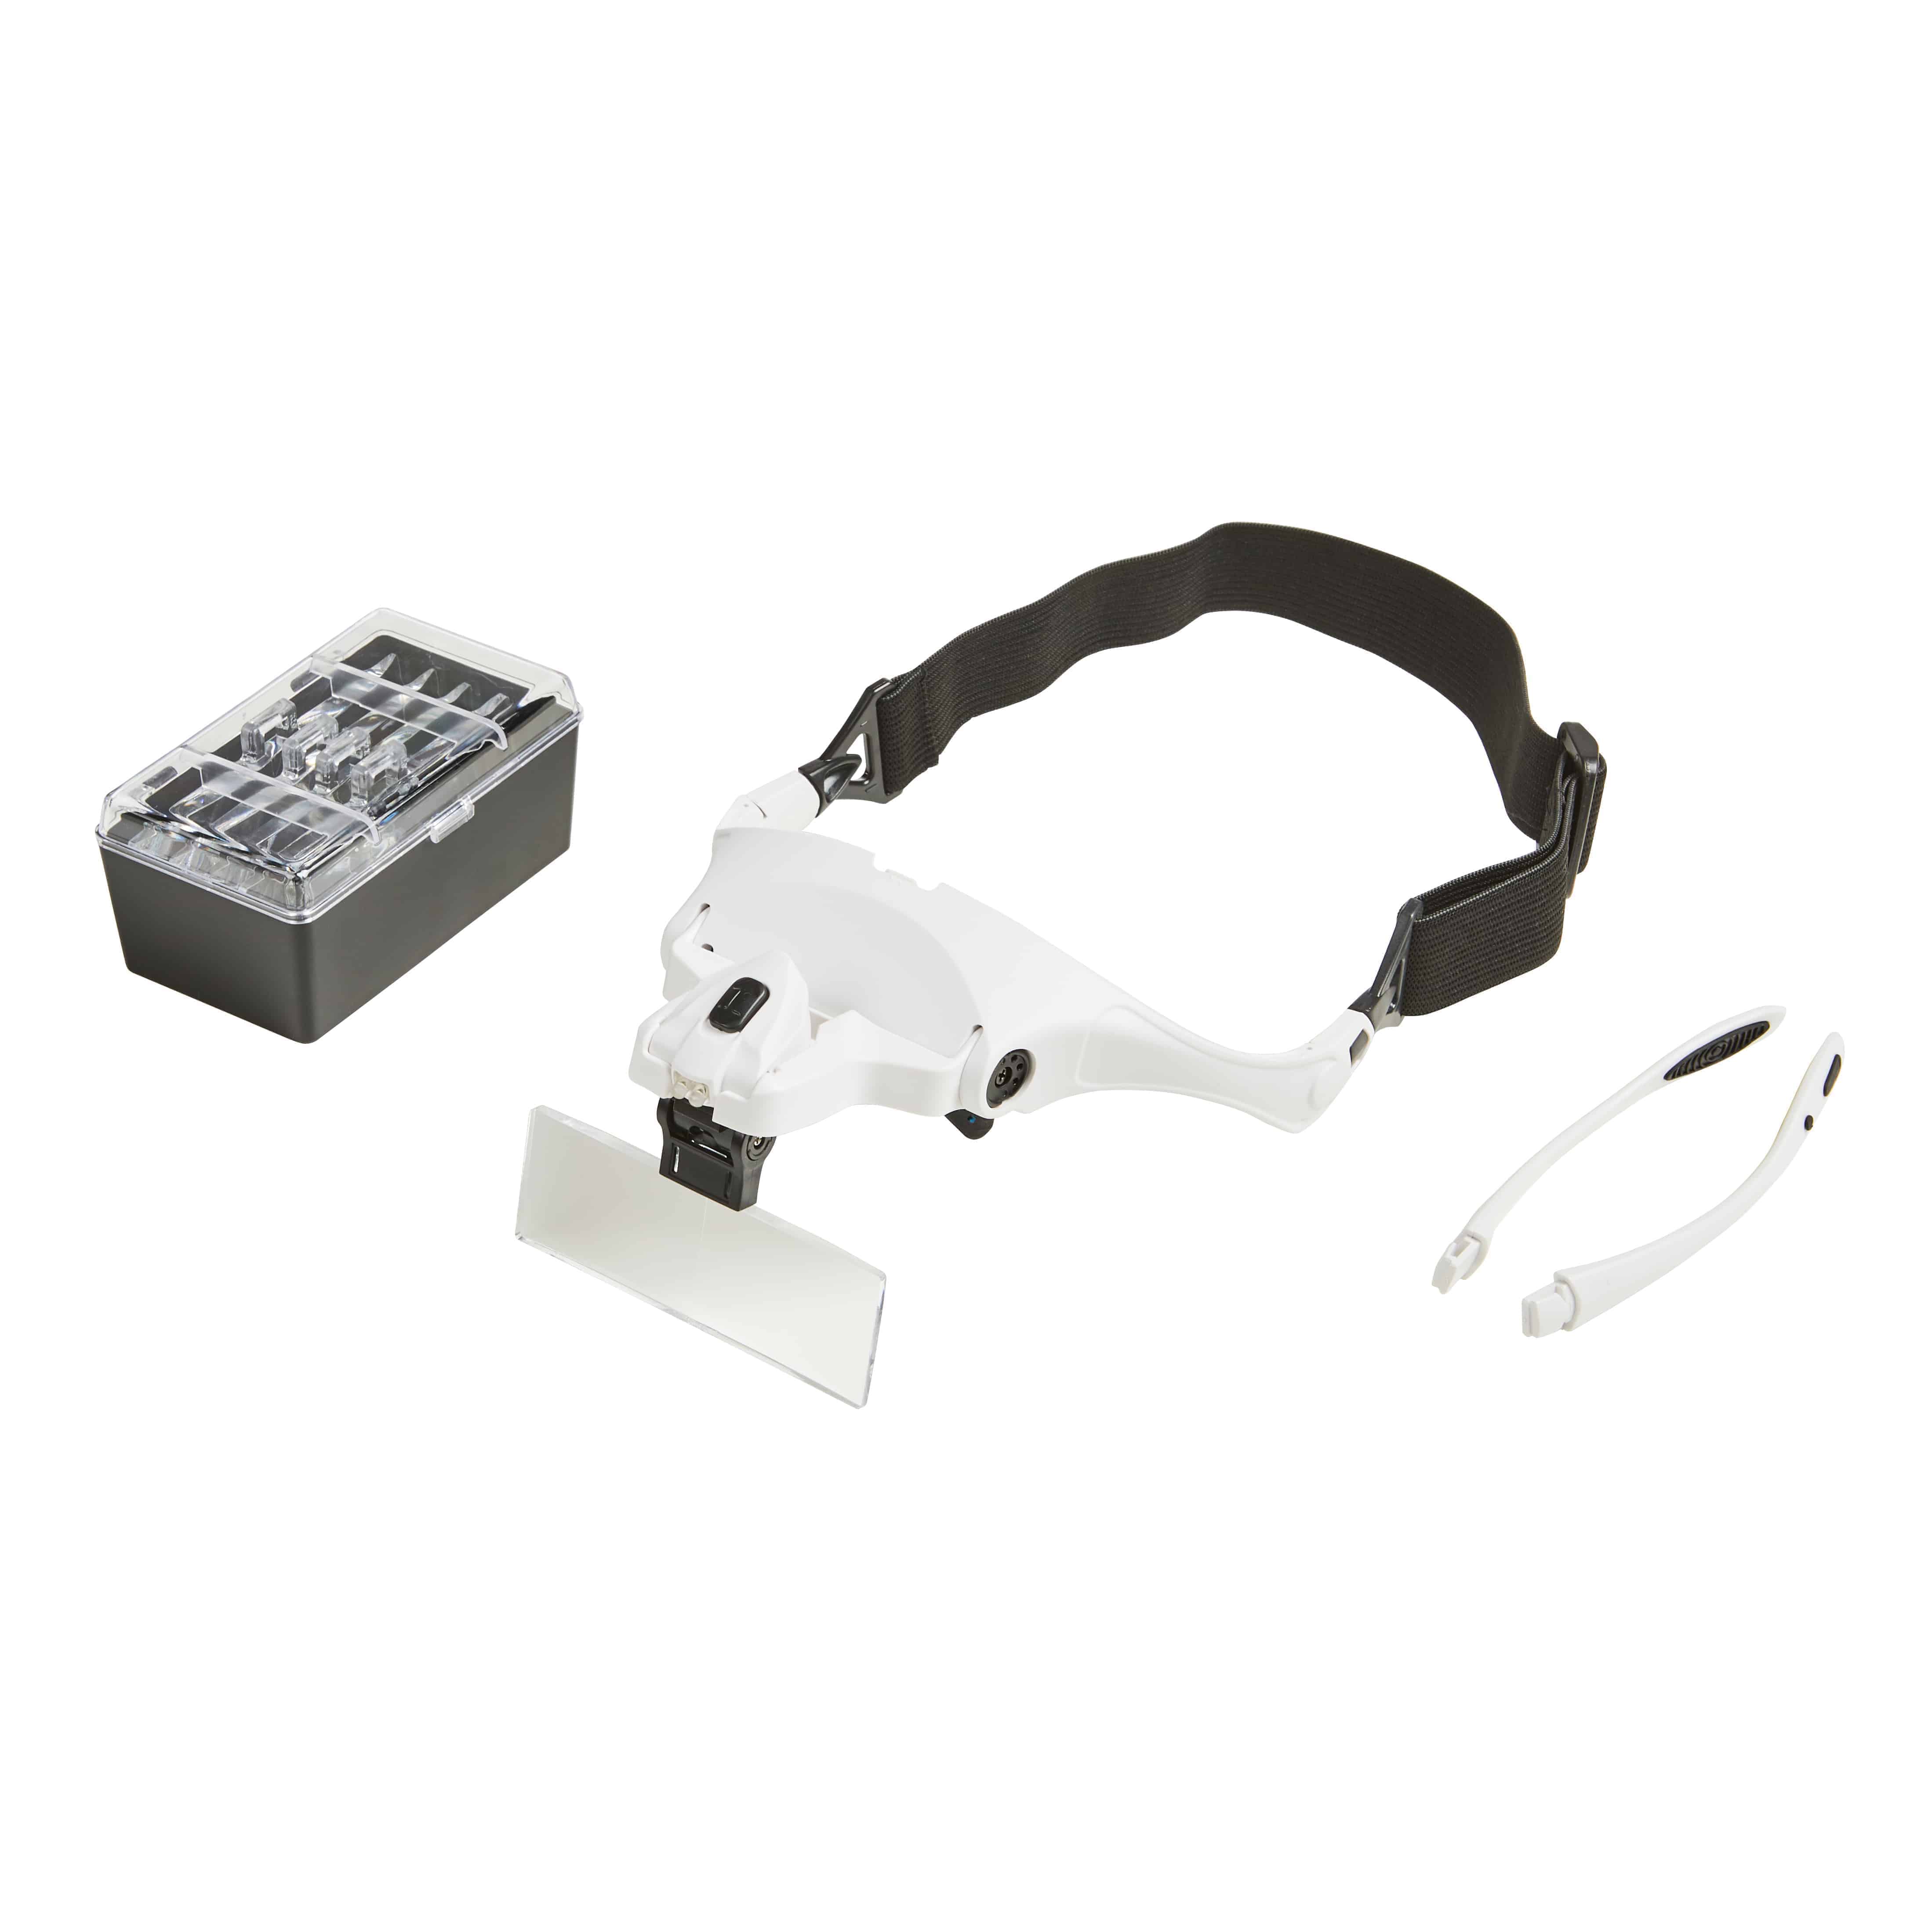 Eyeglasses / magnifier with 2 LED